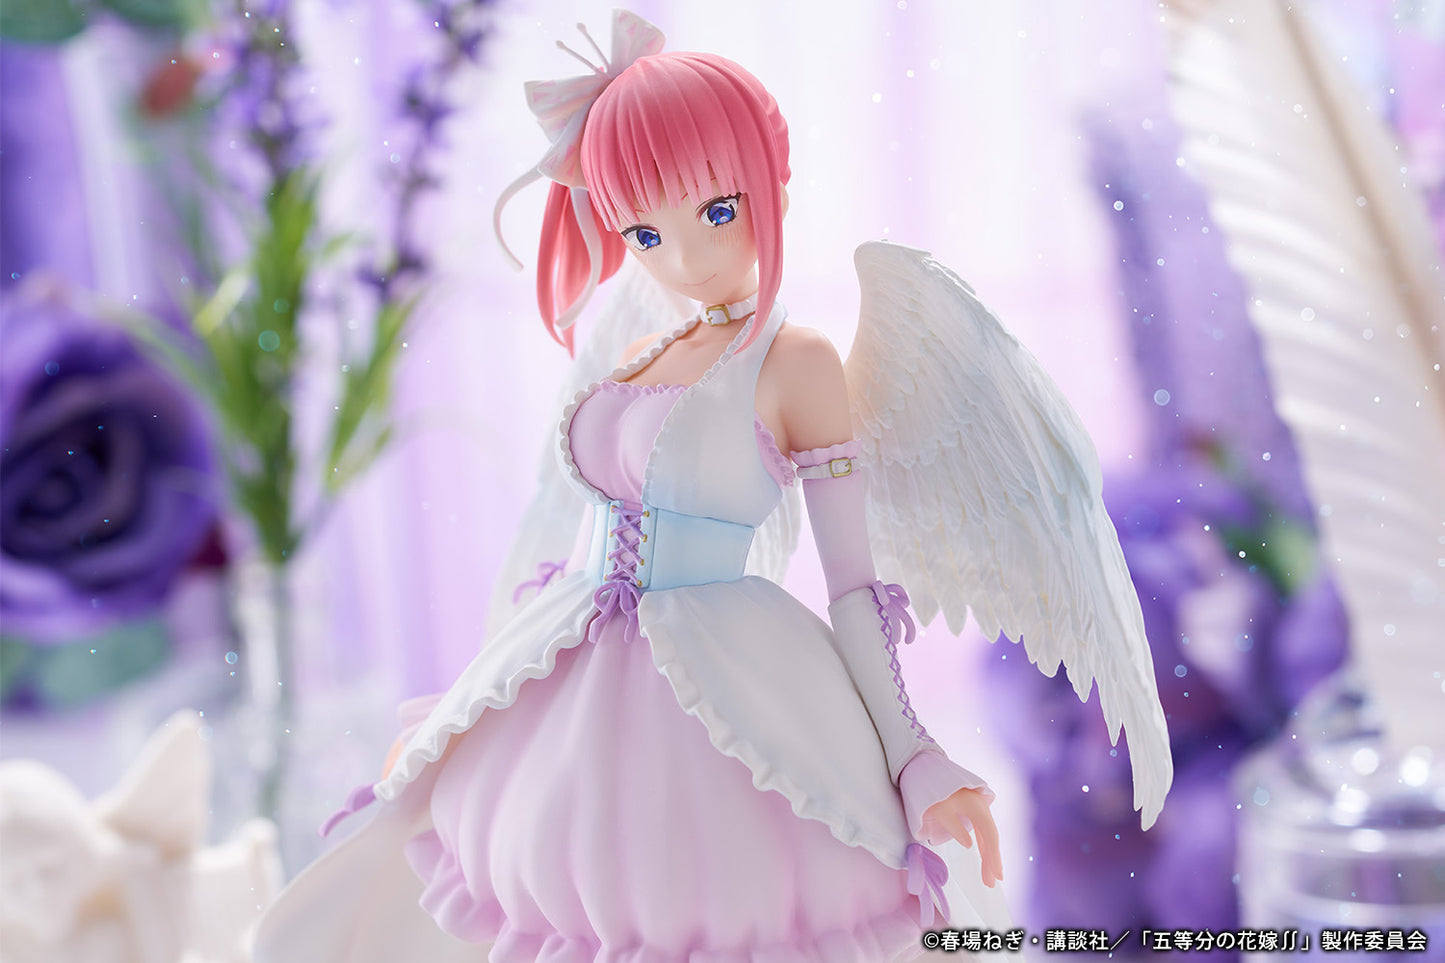 The Quintessential Quintuplets Season 2 1/7 Scale Figure Nakano Nino Angel Ver., Action & Toy Figures, animota